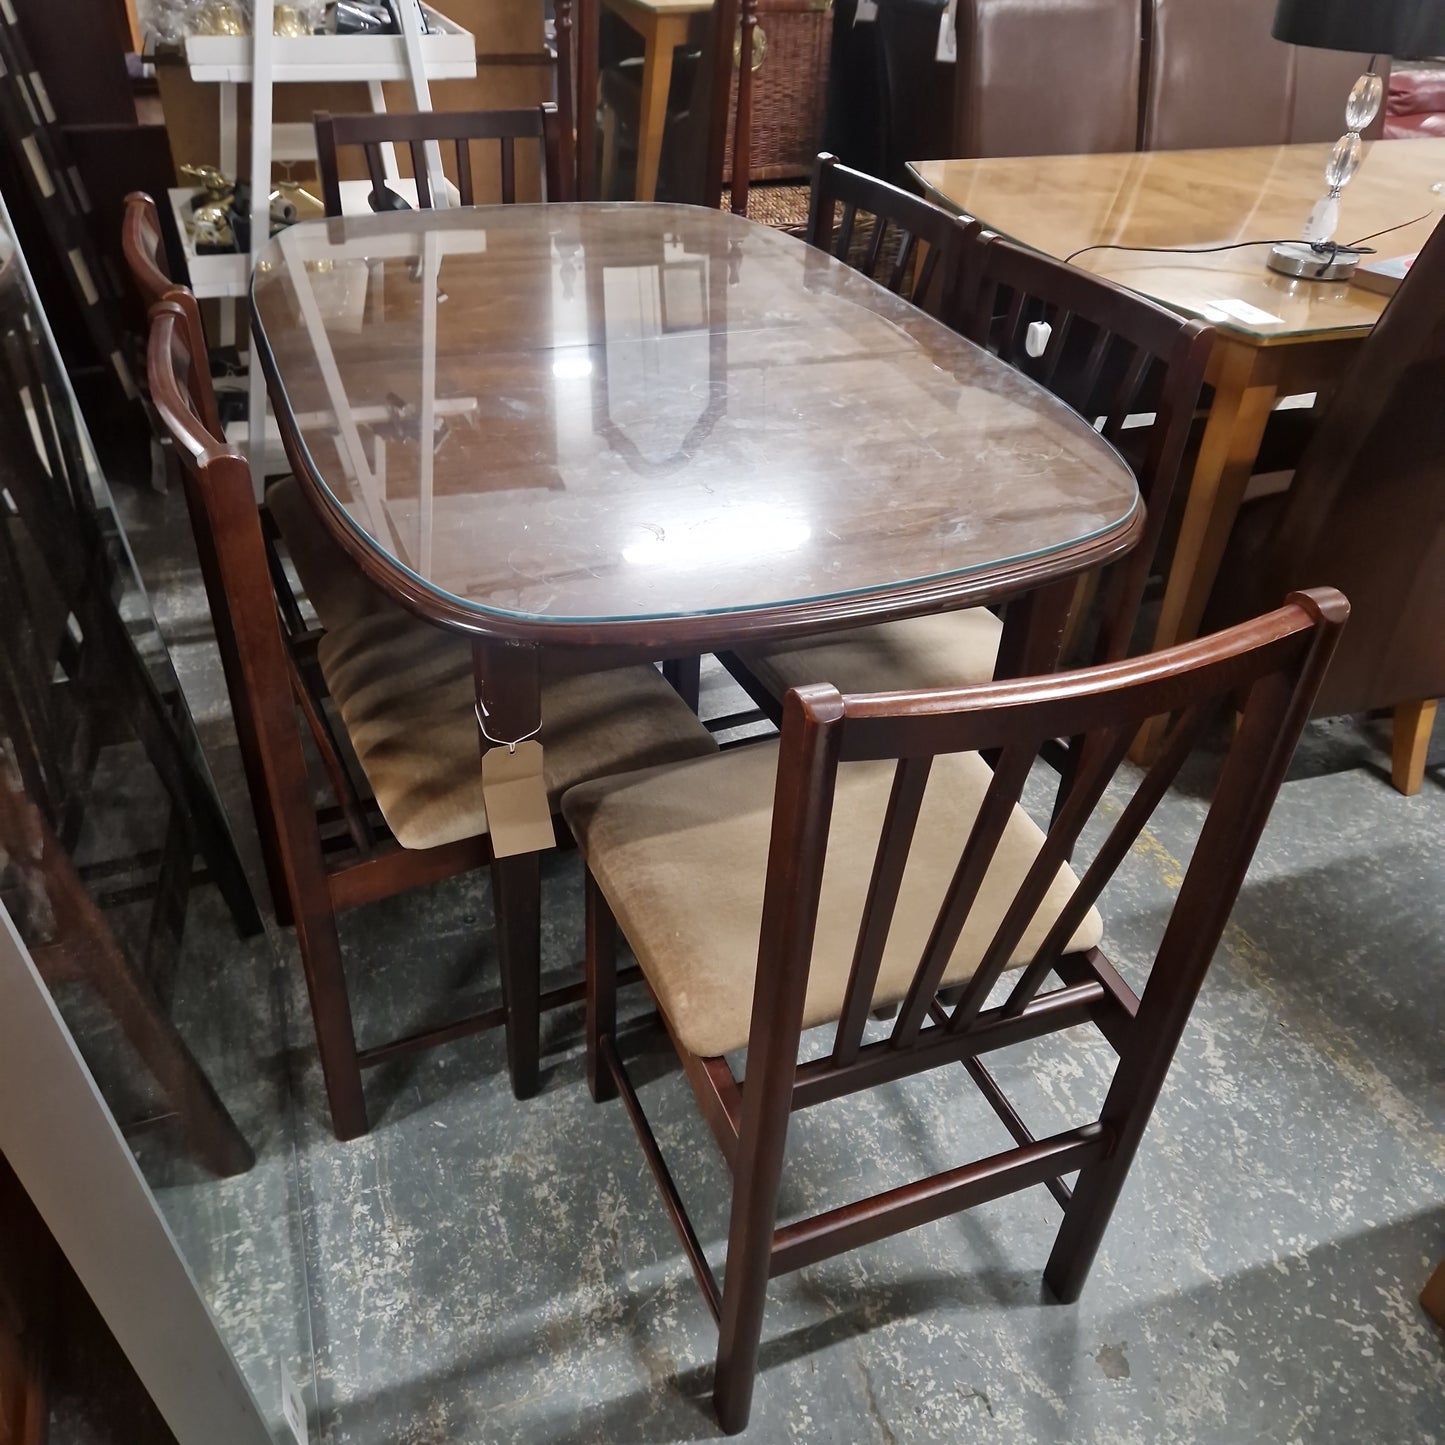 Glass top rossmore mahogany extendable kitchen table cw 6 no. matching chairs with fabric seat